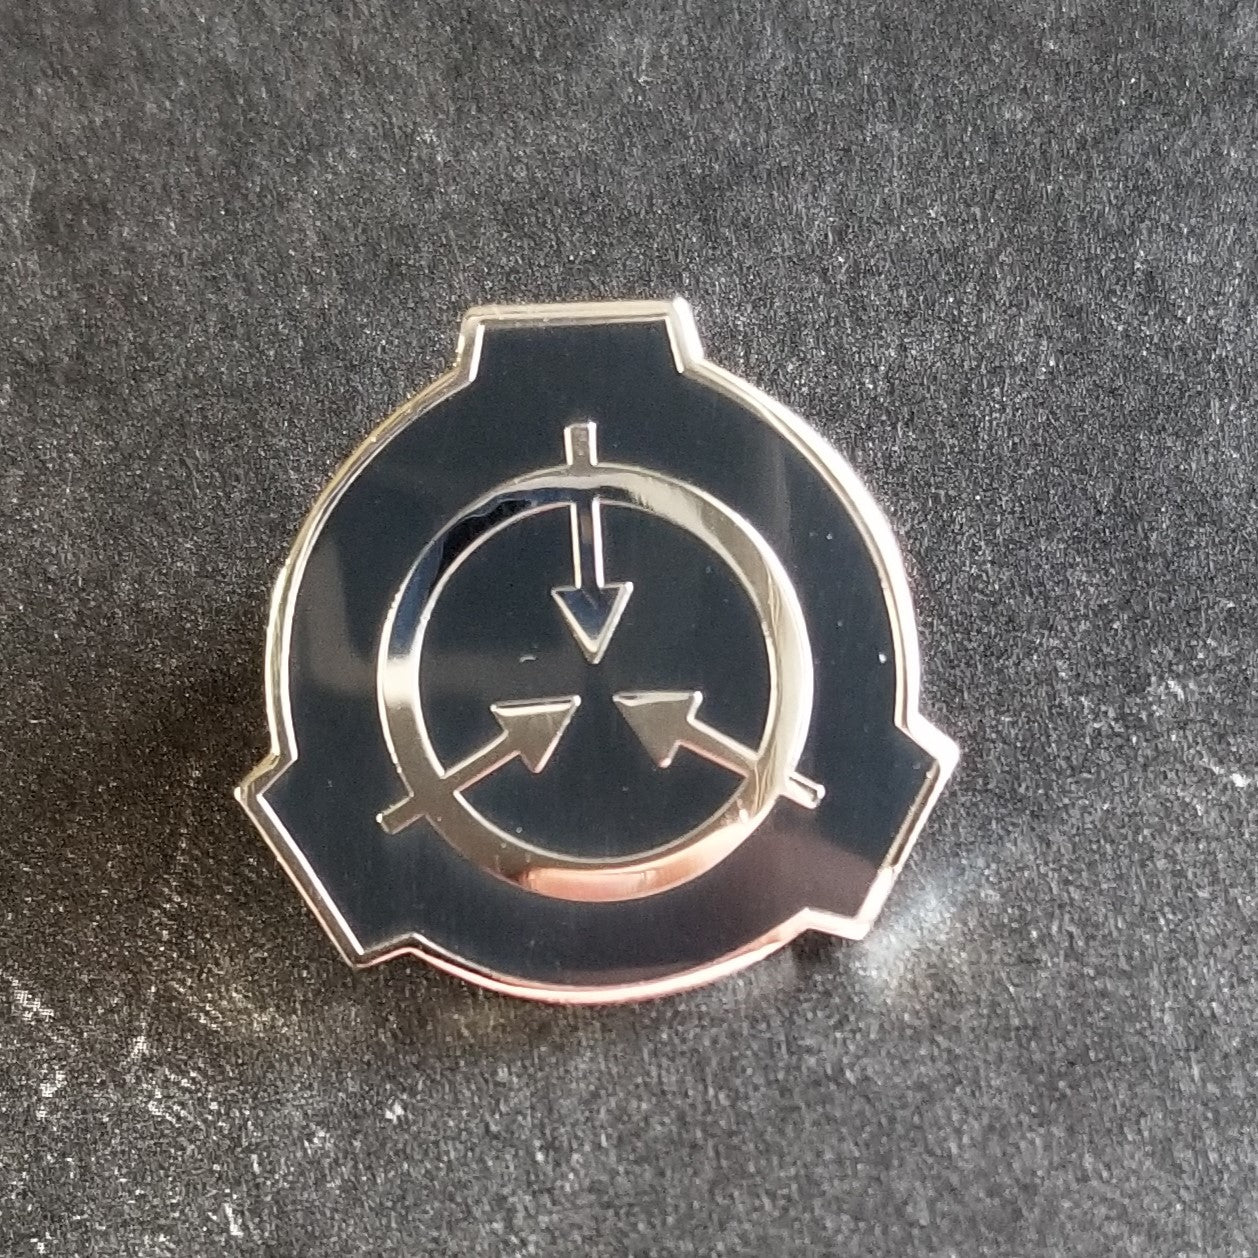 Pin on Scp's